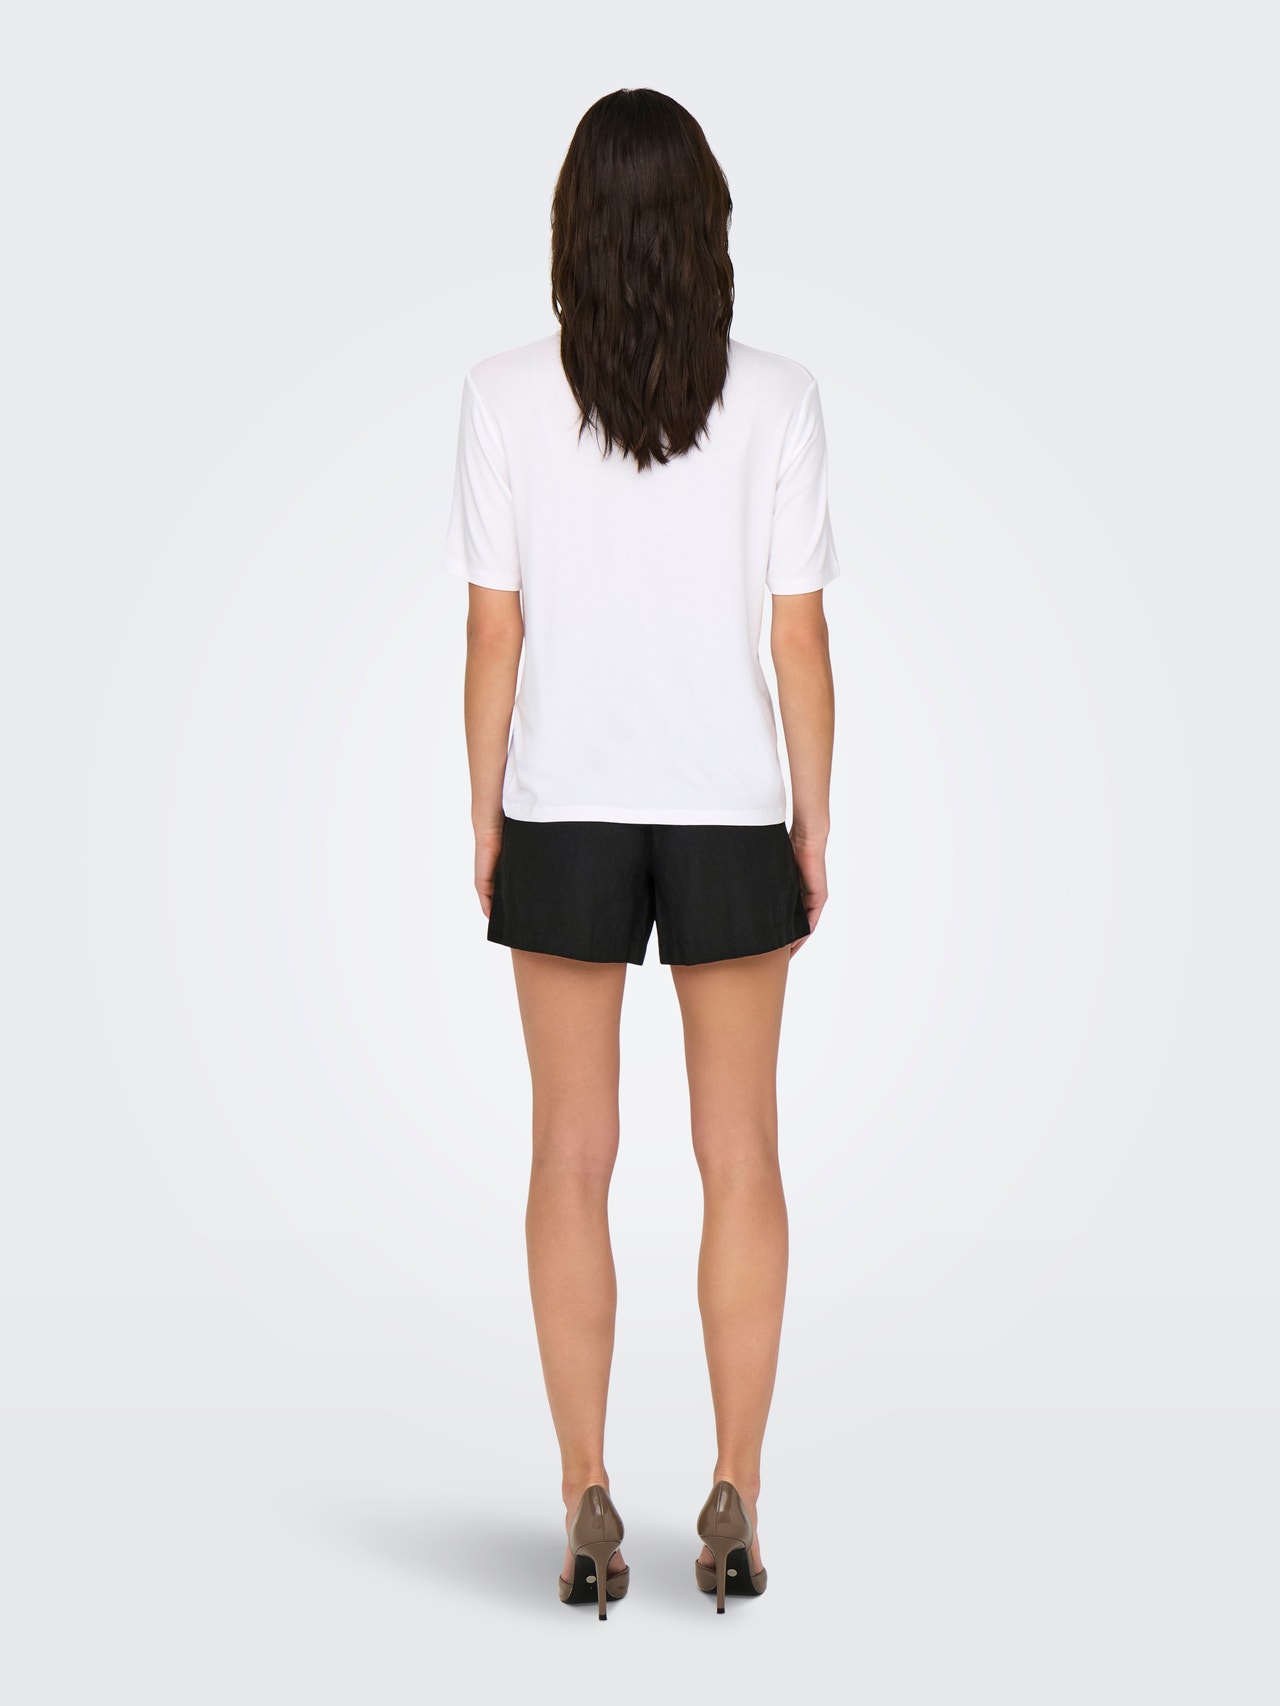 ONLY High waisted linen shorts -Black - 15321518